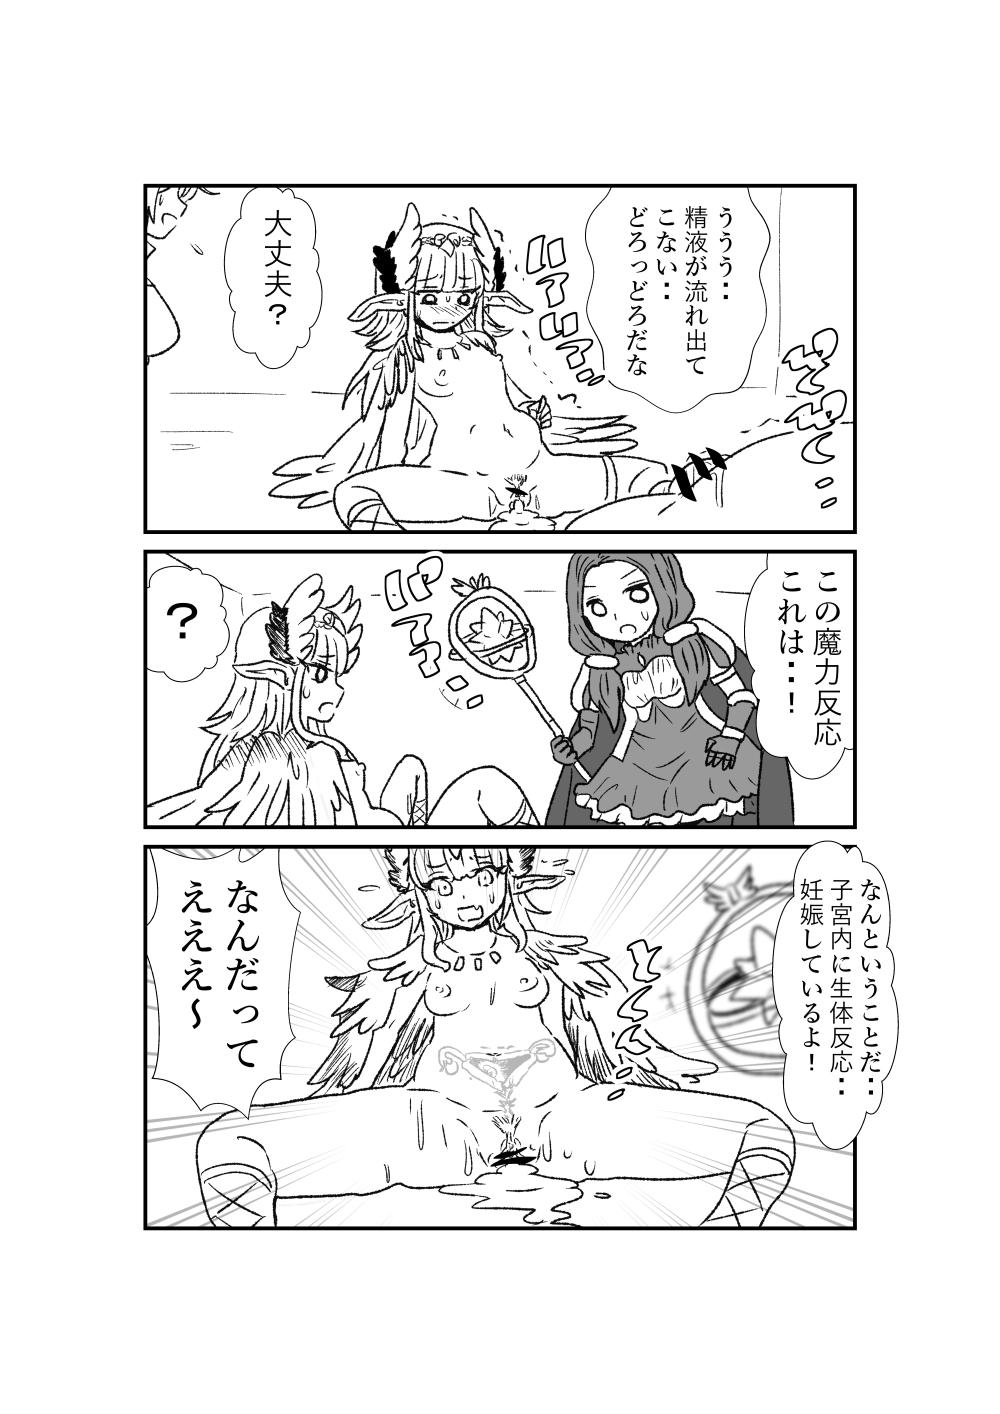 Jerking FPO~桃色林檎の種付け周回～ - Fate grand order Wives - Page 8